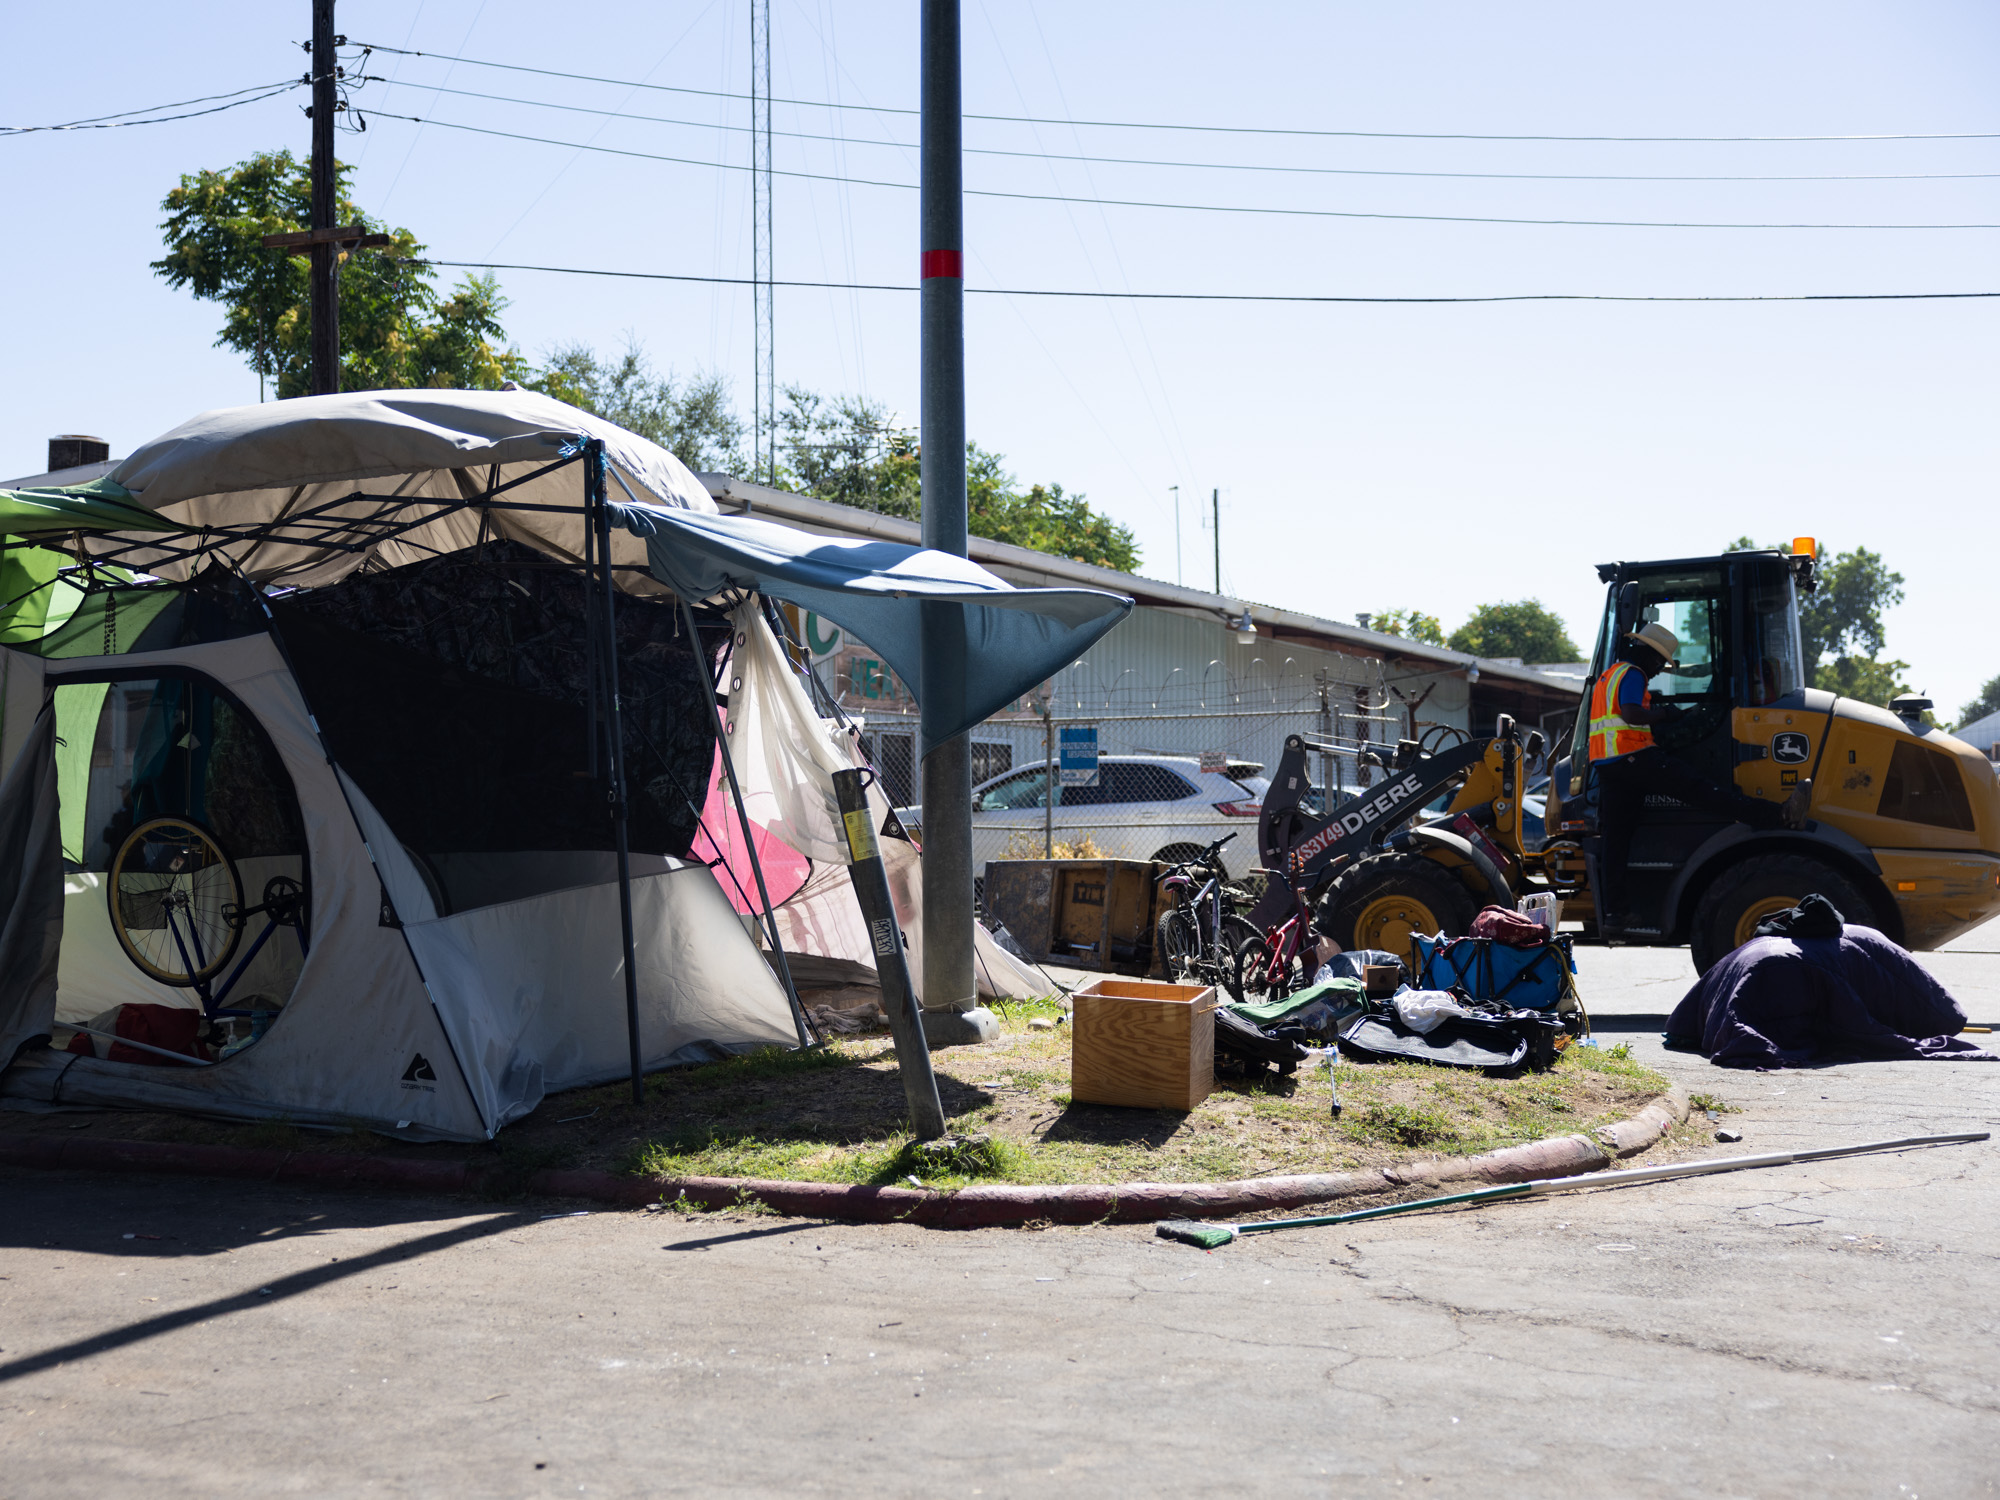 Why the Sac County DA is Threatening to Sue the City Over Homeless Encampments Researching Poor Air Quality and Health in Sacramento Neighborhoods